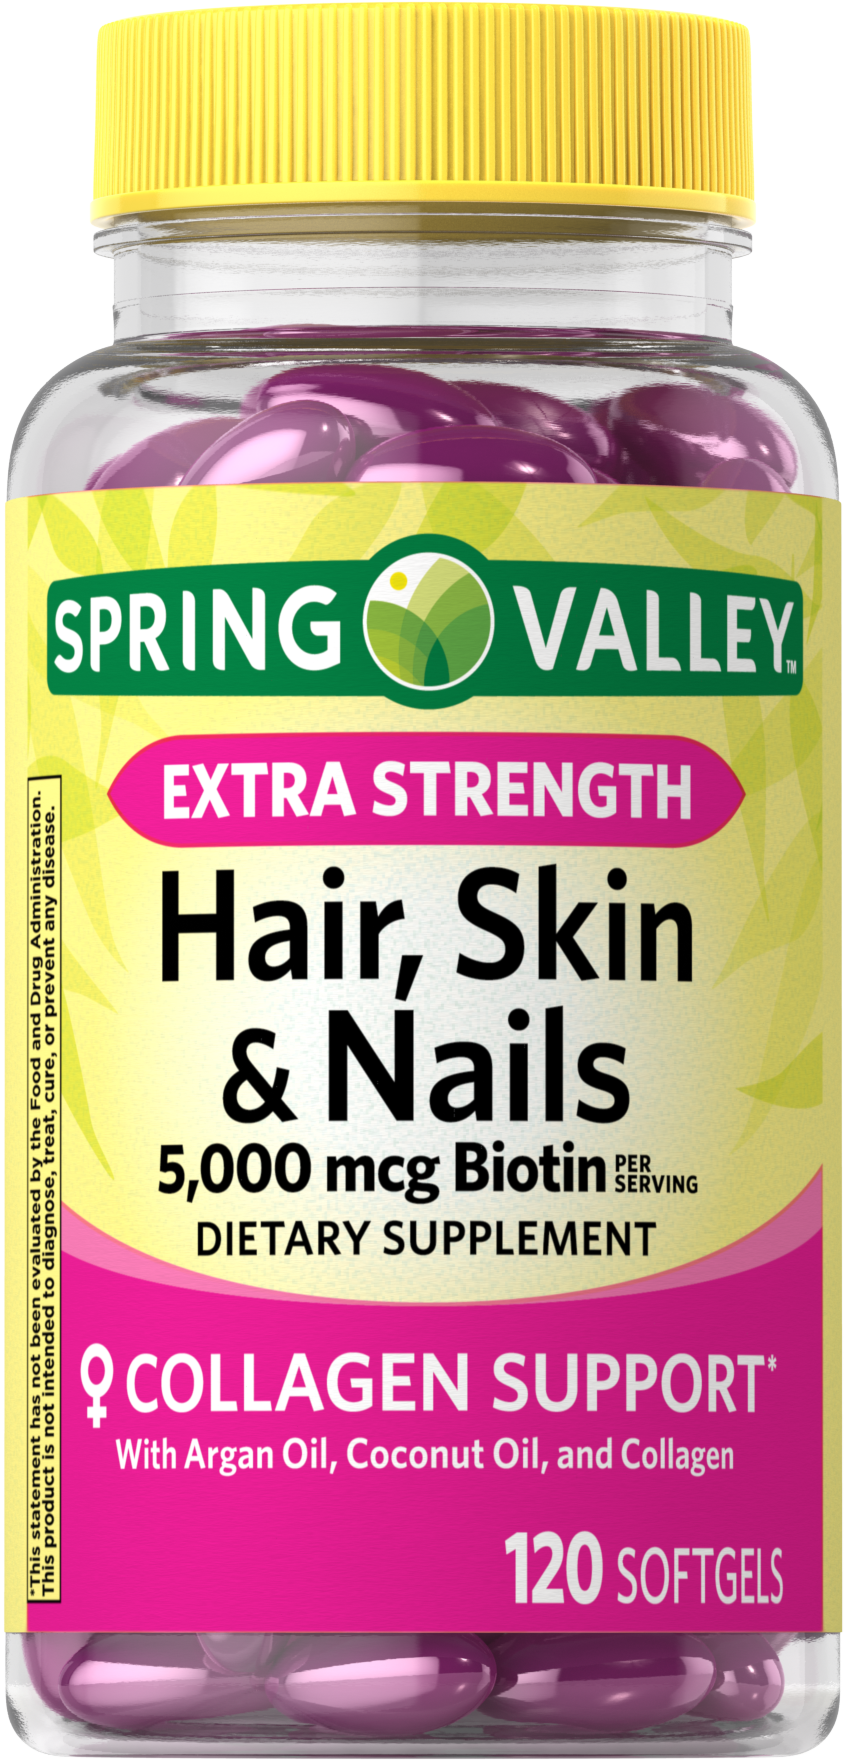 Spring Valley Hair, Skin & Nails Dietary Supplement Softgels, 5,000 Mcg Biotin, 120 Ct - image 2 of 13